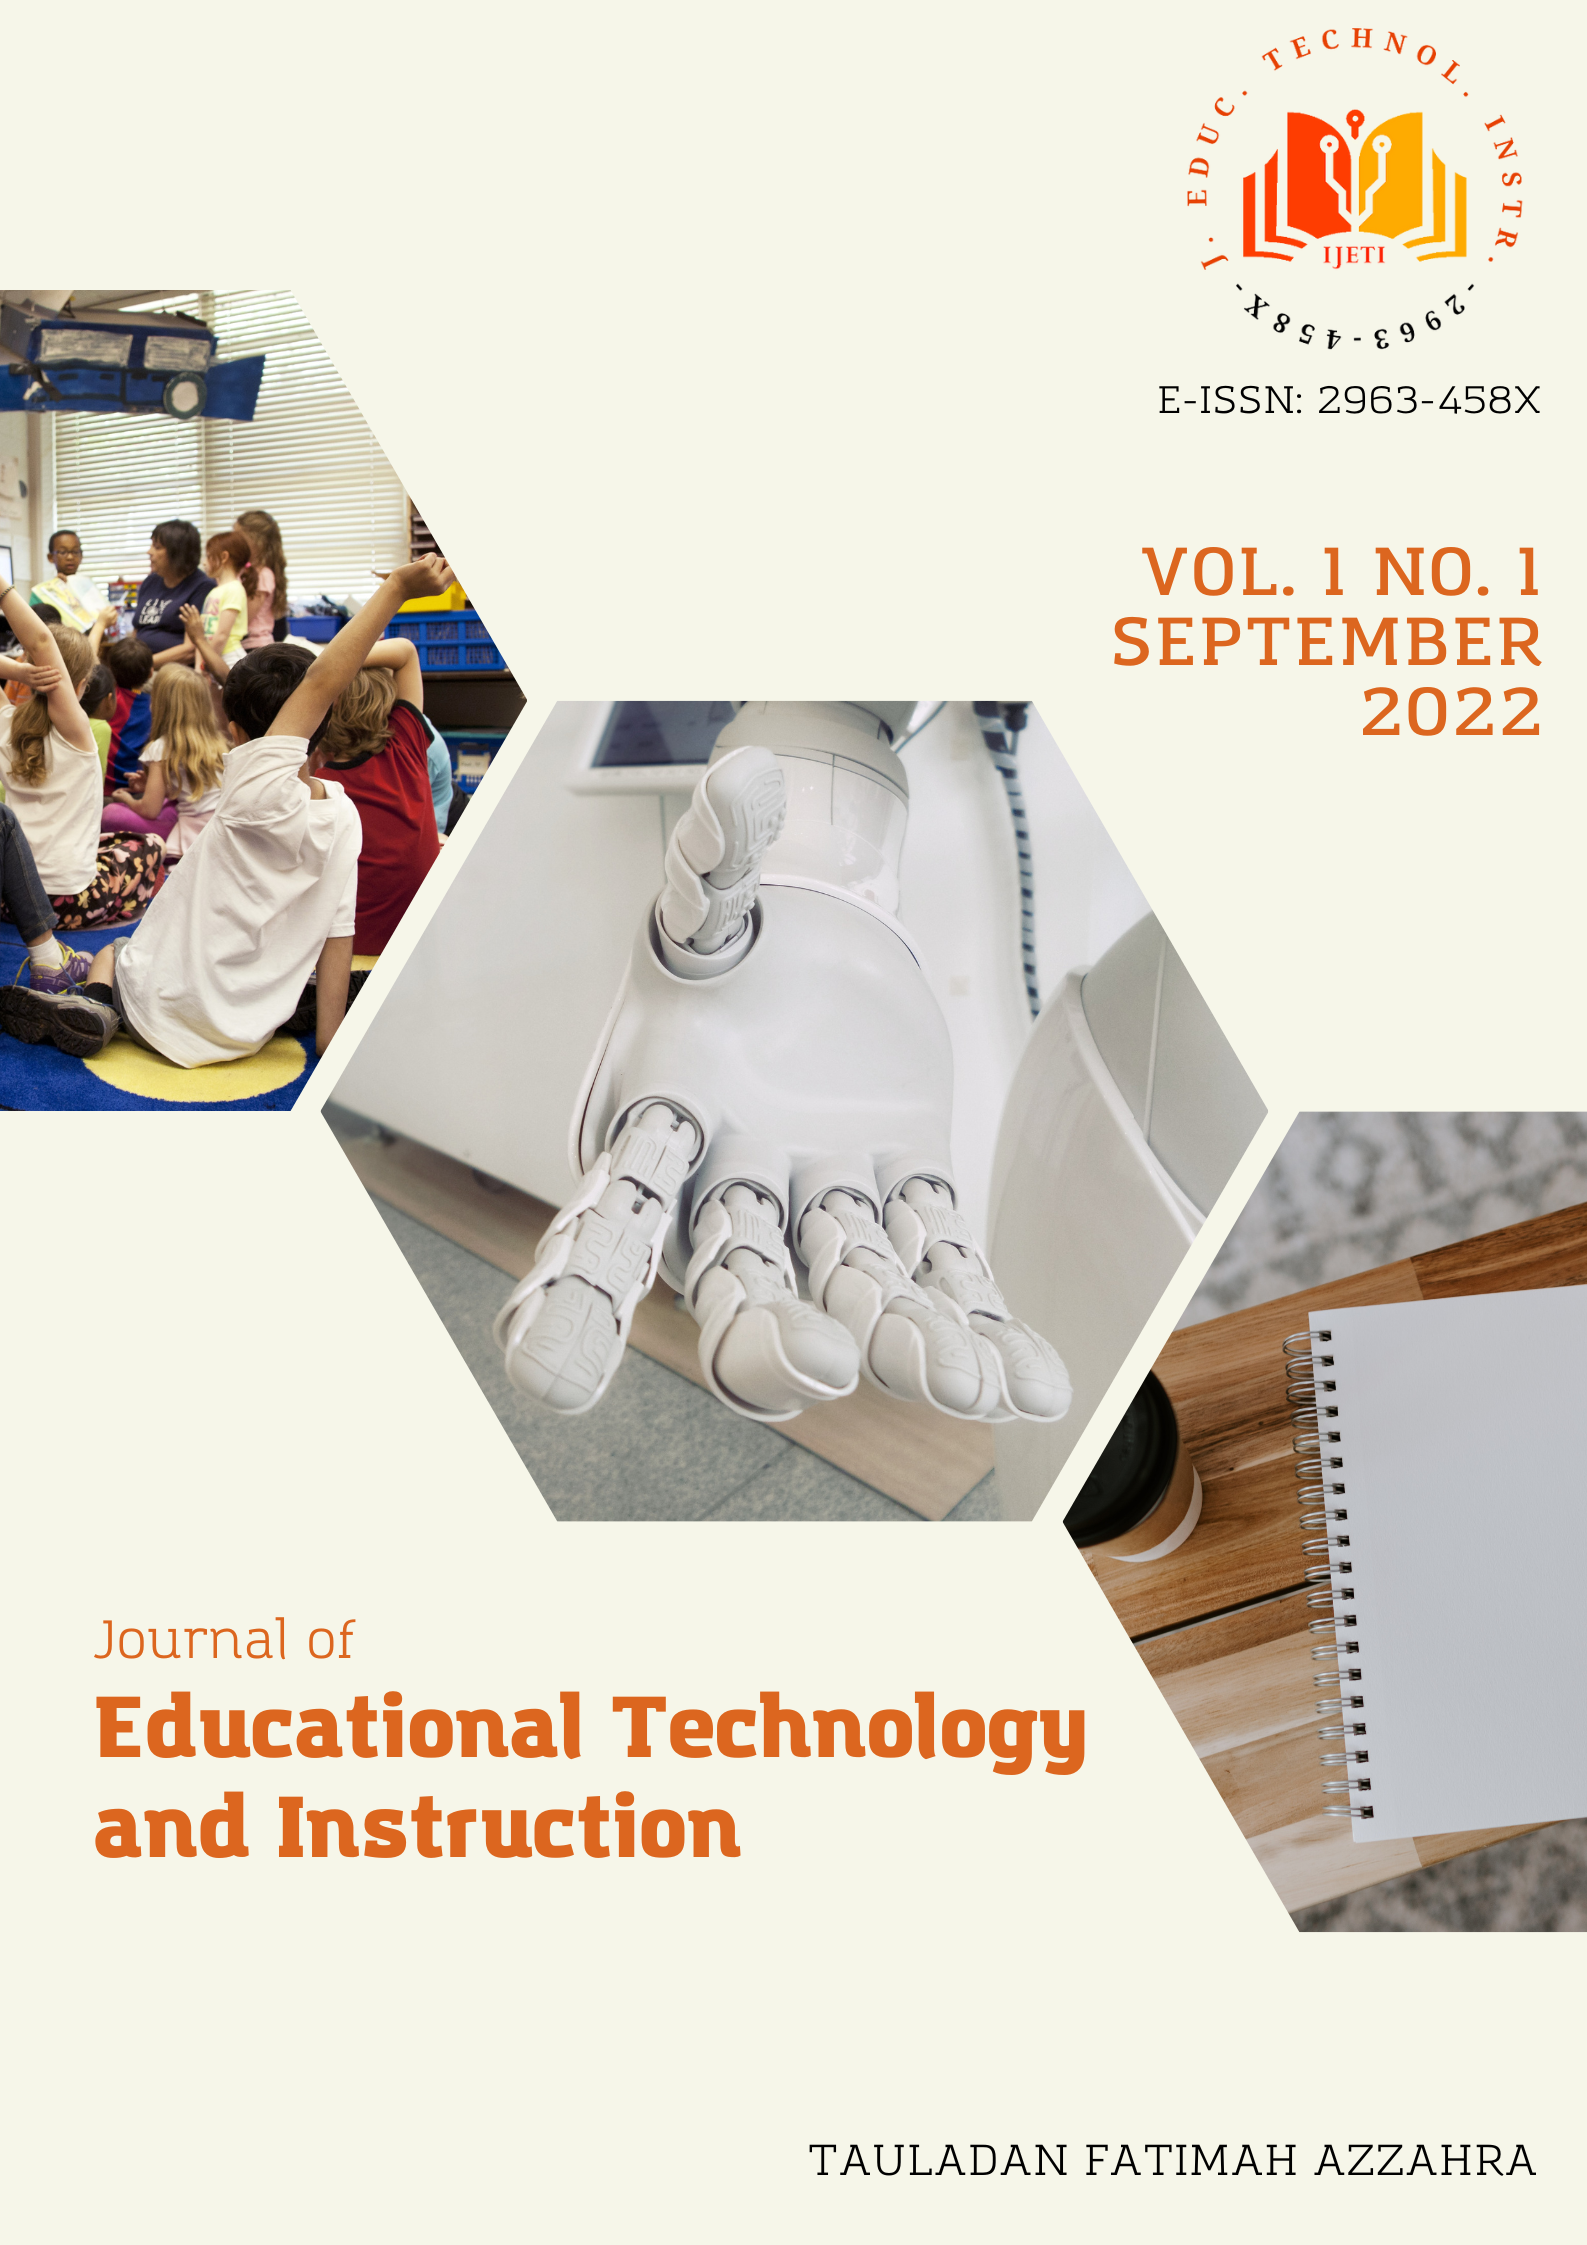 Adelantar Médula Contratación A Systematic Review of Learning Media Research Trends From 2011 to 2021 |  Journal of Educational Technology and Instruction